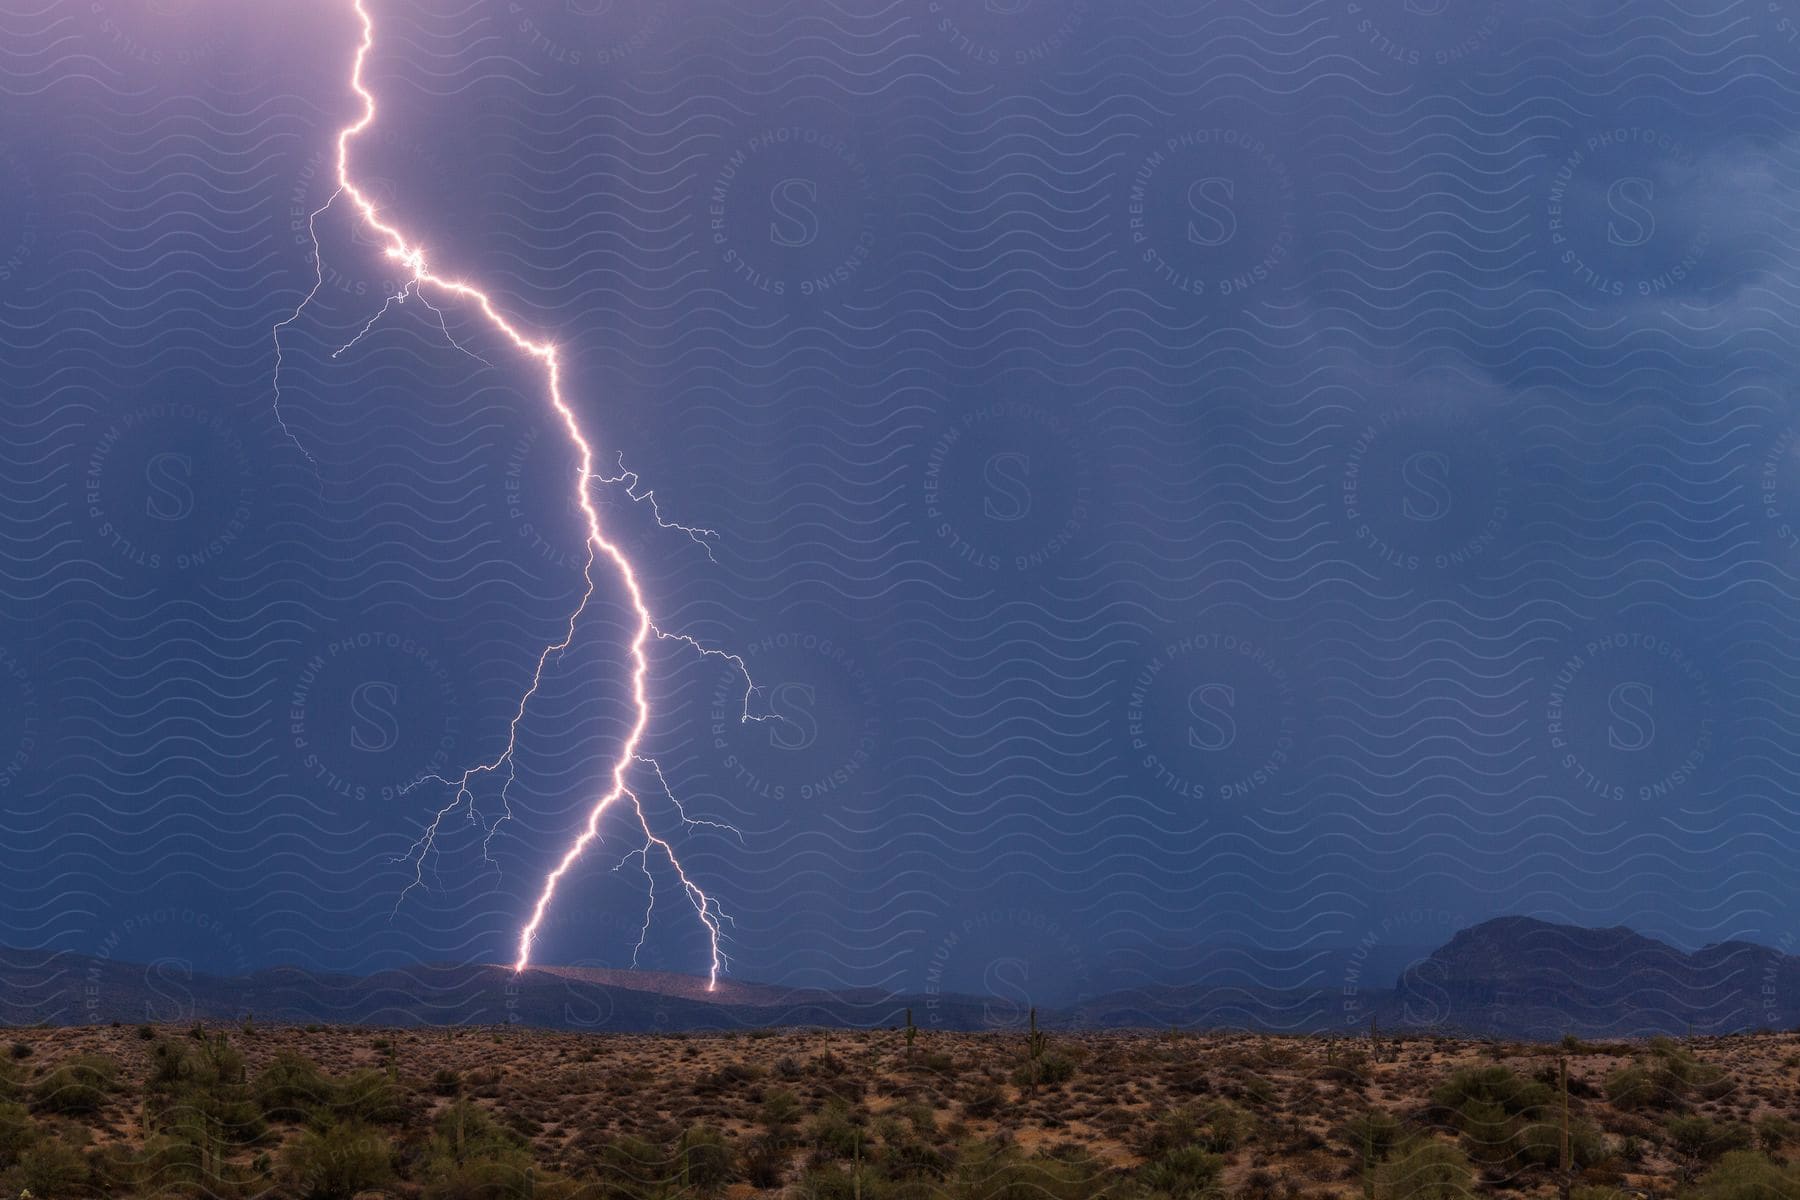 A desert landscape with lightning striking a mountain at night in the four peaks wilderness area northeast of phoenix